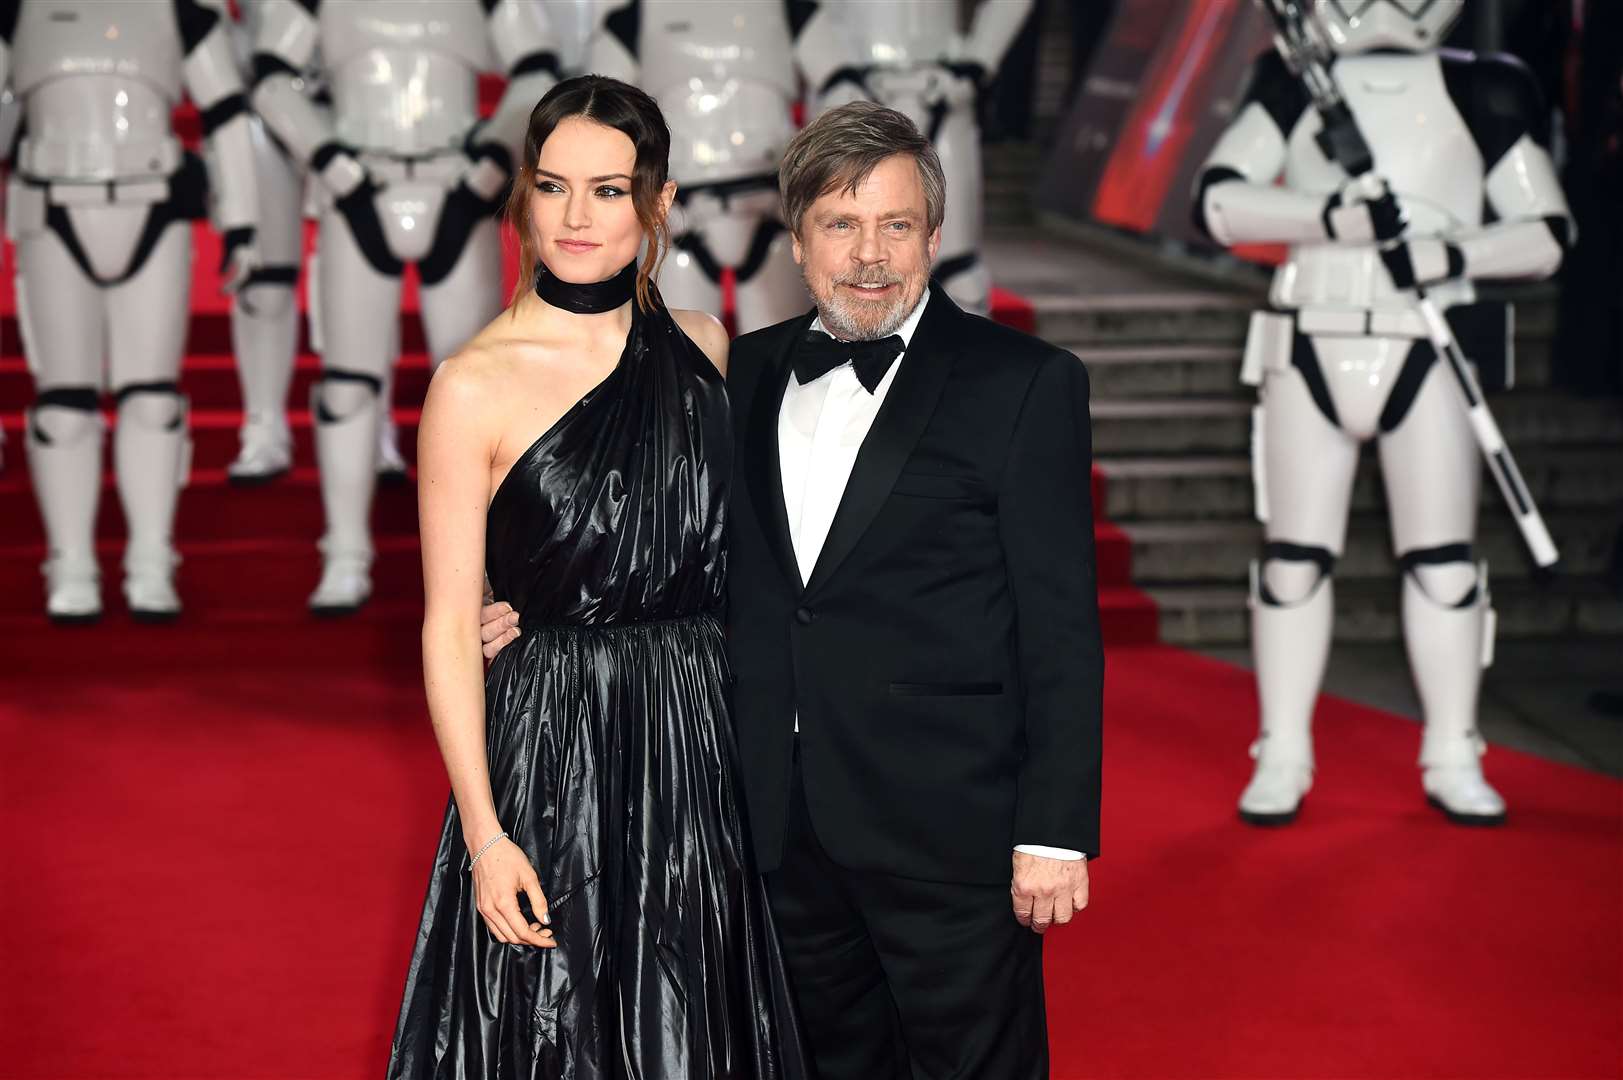 Daisy Ridley (left) and Mark Hamill attending the European premiere of Star Wars: The Last Jedi held at The Royal Albert Hall, London (Matt Crossick/PA)